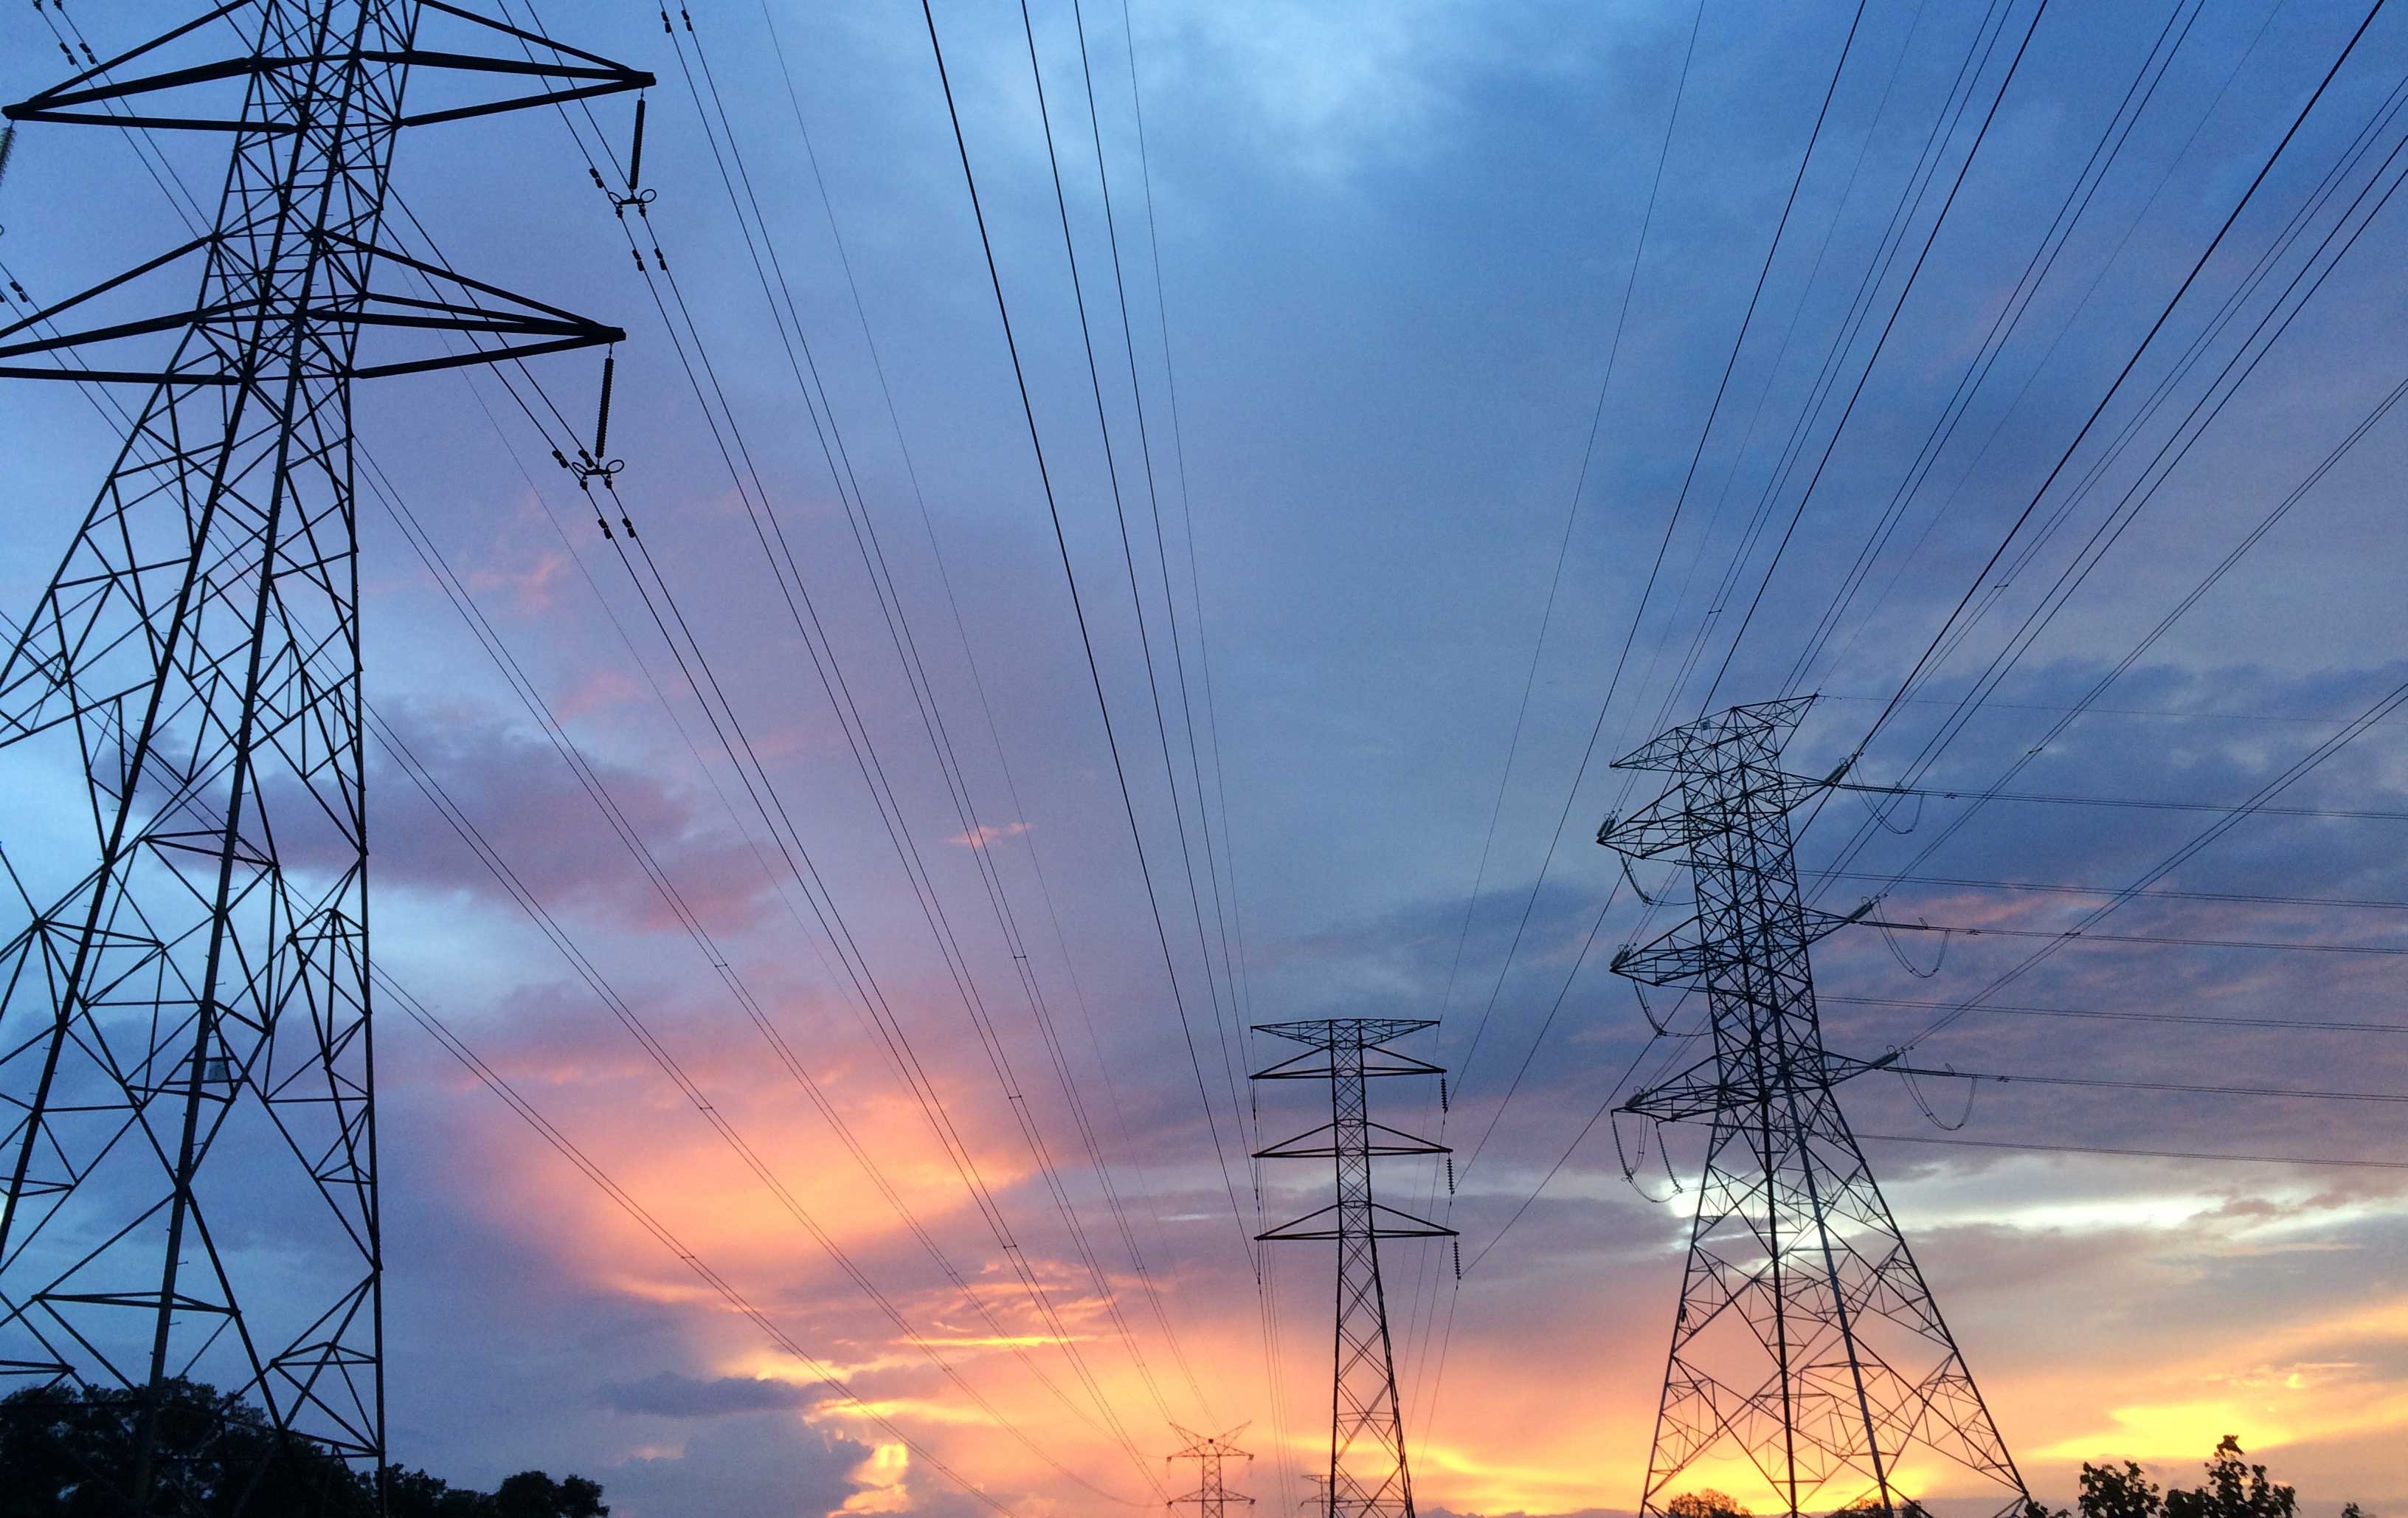 A colorful sunset with electrical grid towers in the foreground